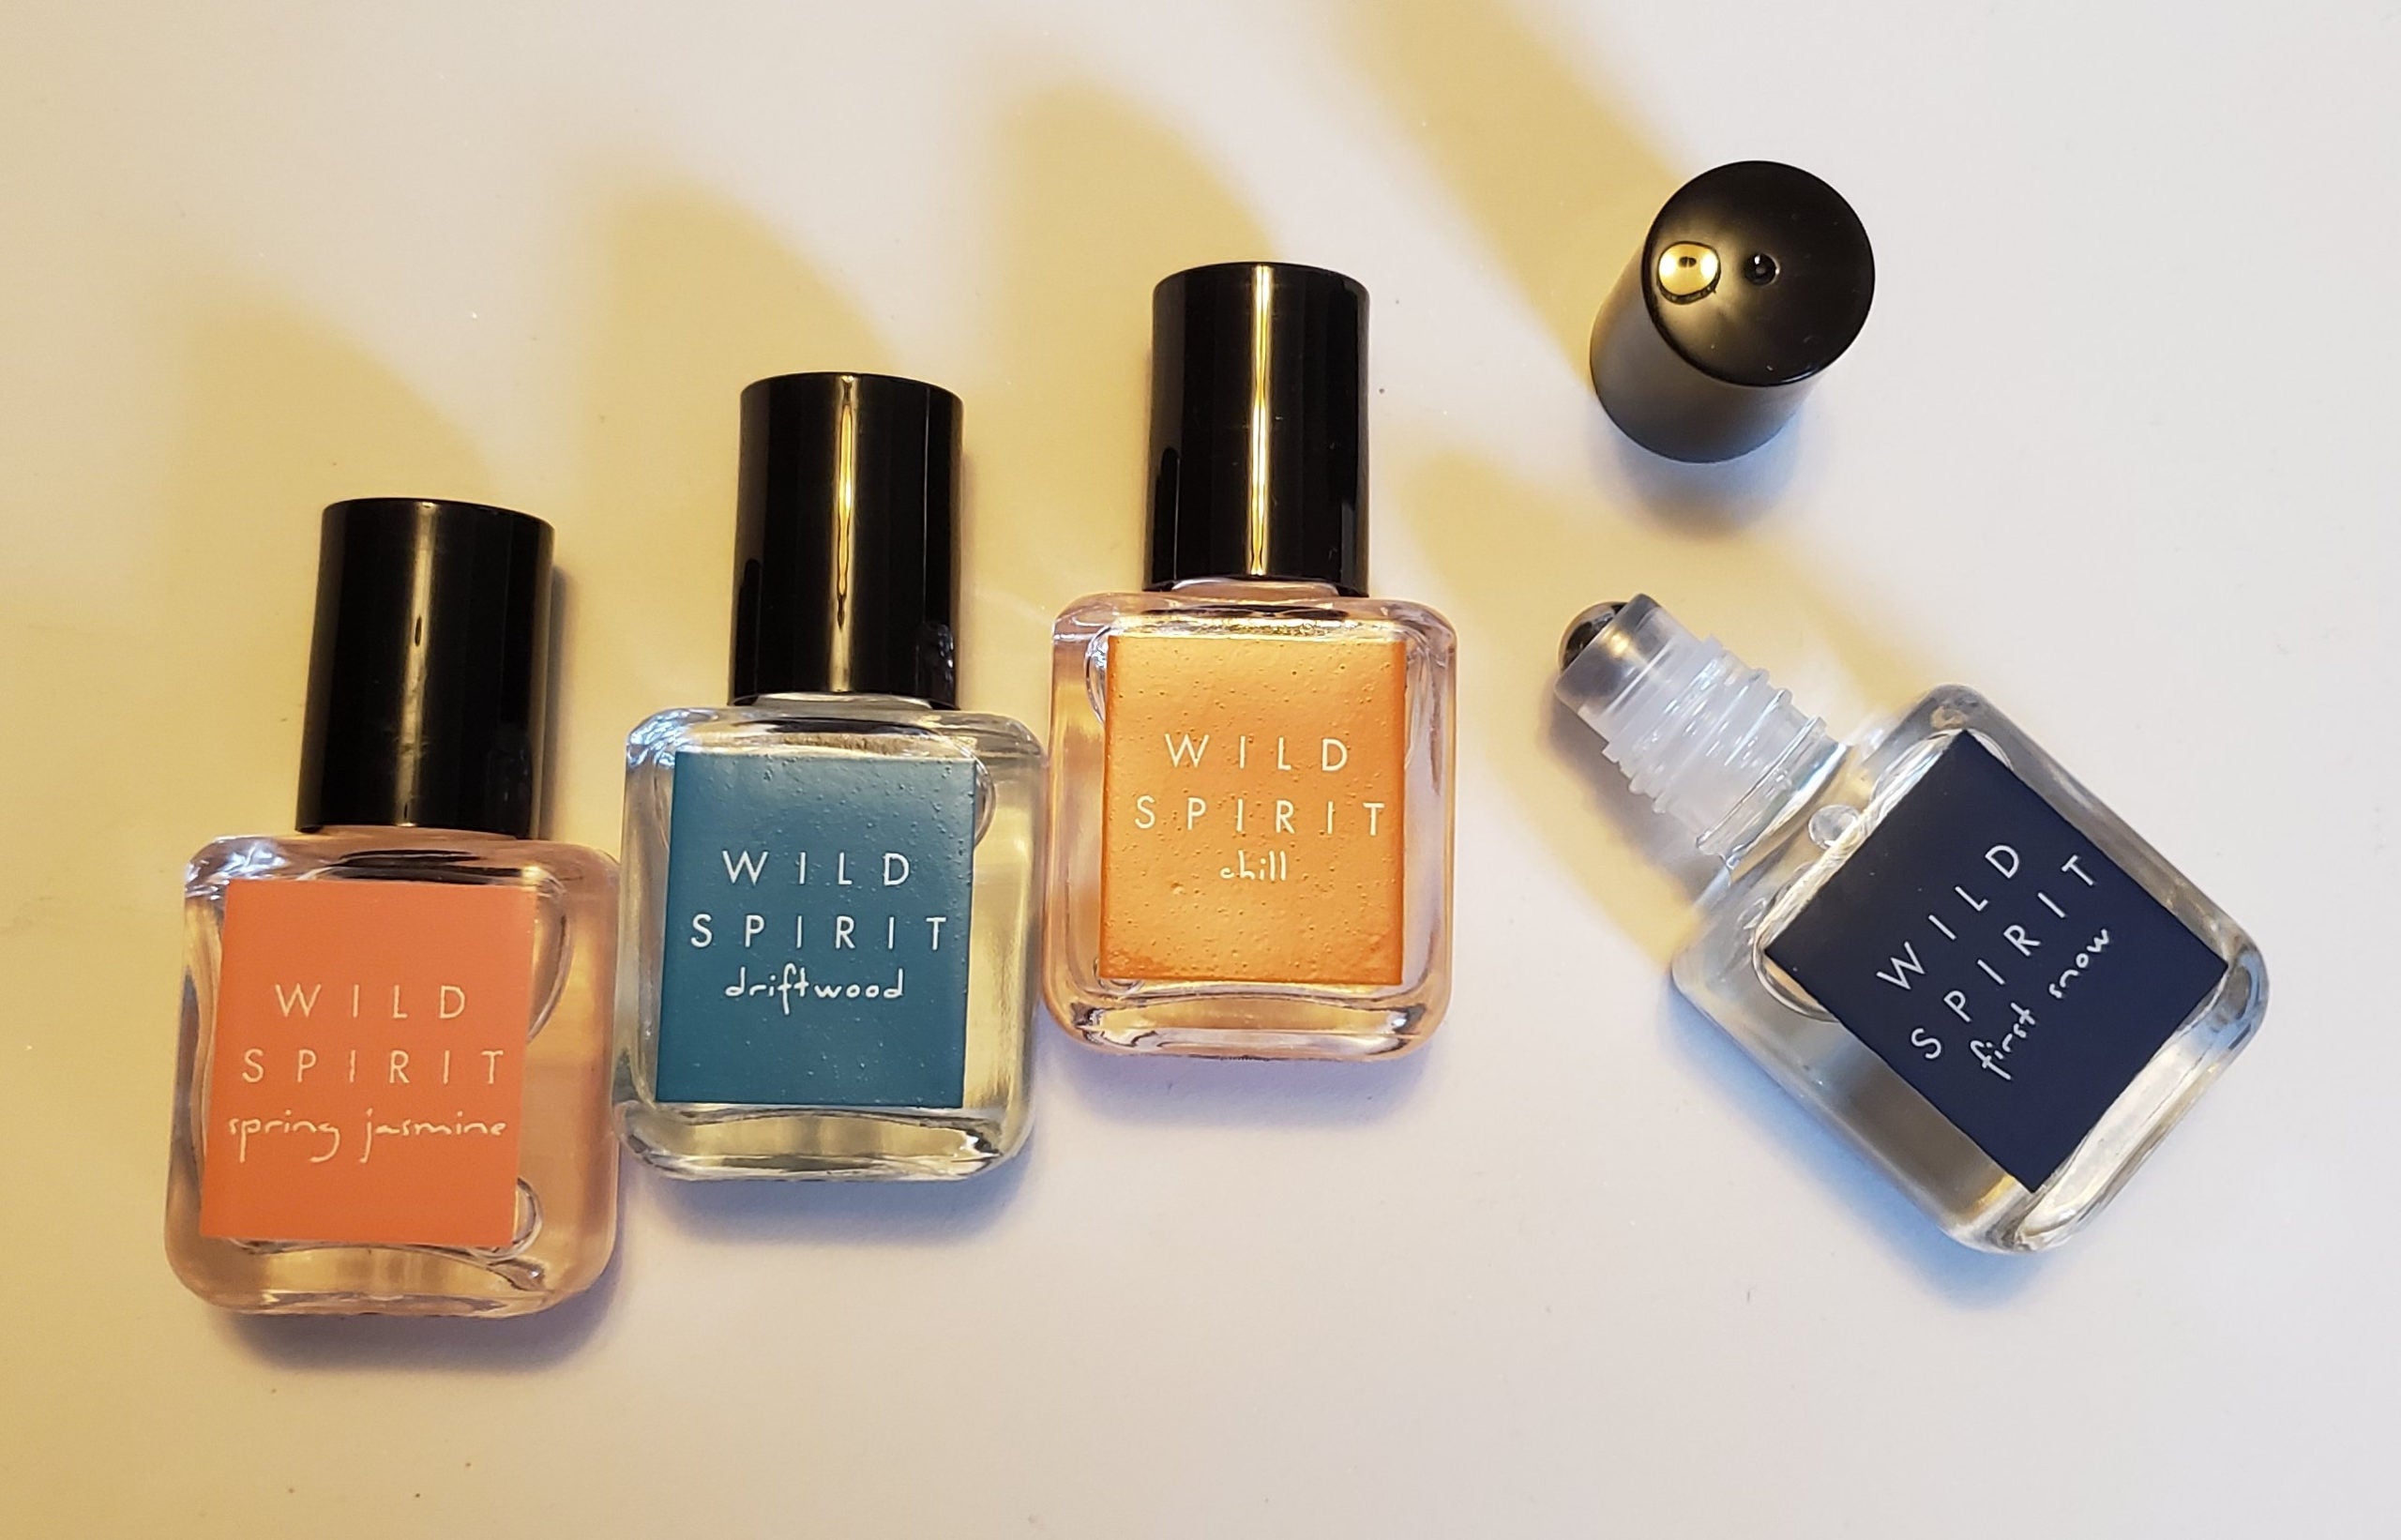 Review, Photos, Perfume, Fragrance Trend, 2019, 2020: Wild Spirit Fragrances, Customize Your Scent, Spring Jasmine, Driftwood, Chill, First Snow